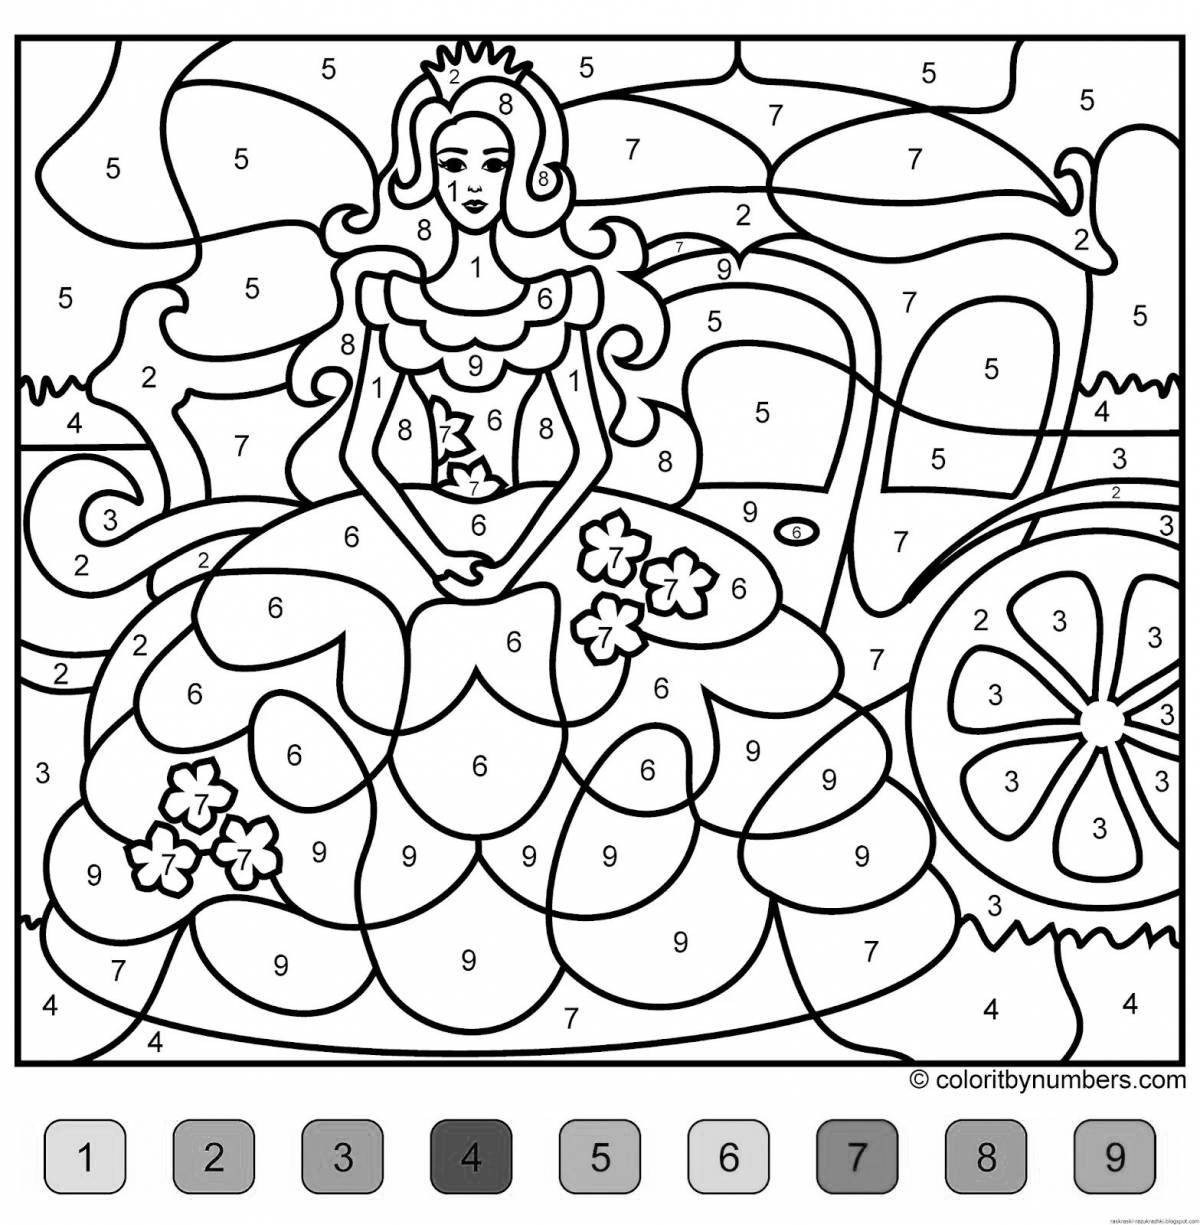 Colorful coloring book for girls 6-7 years old